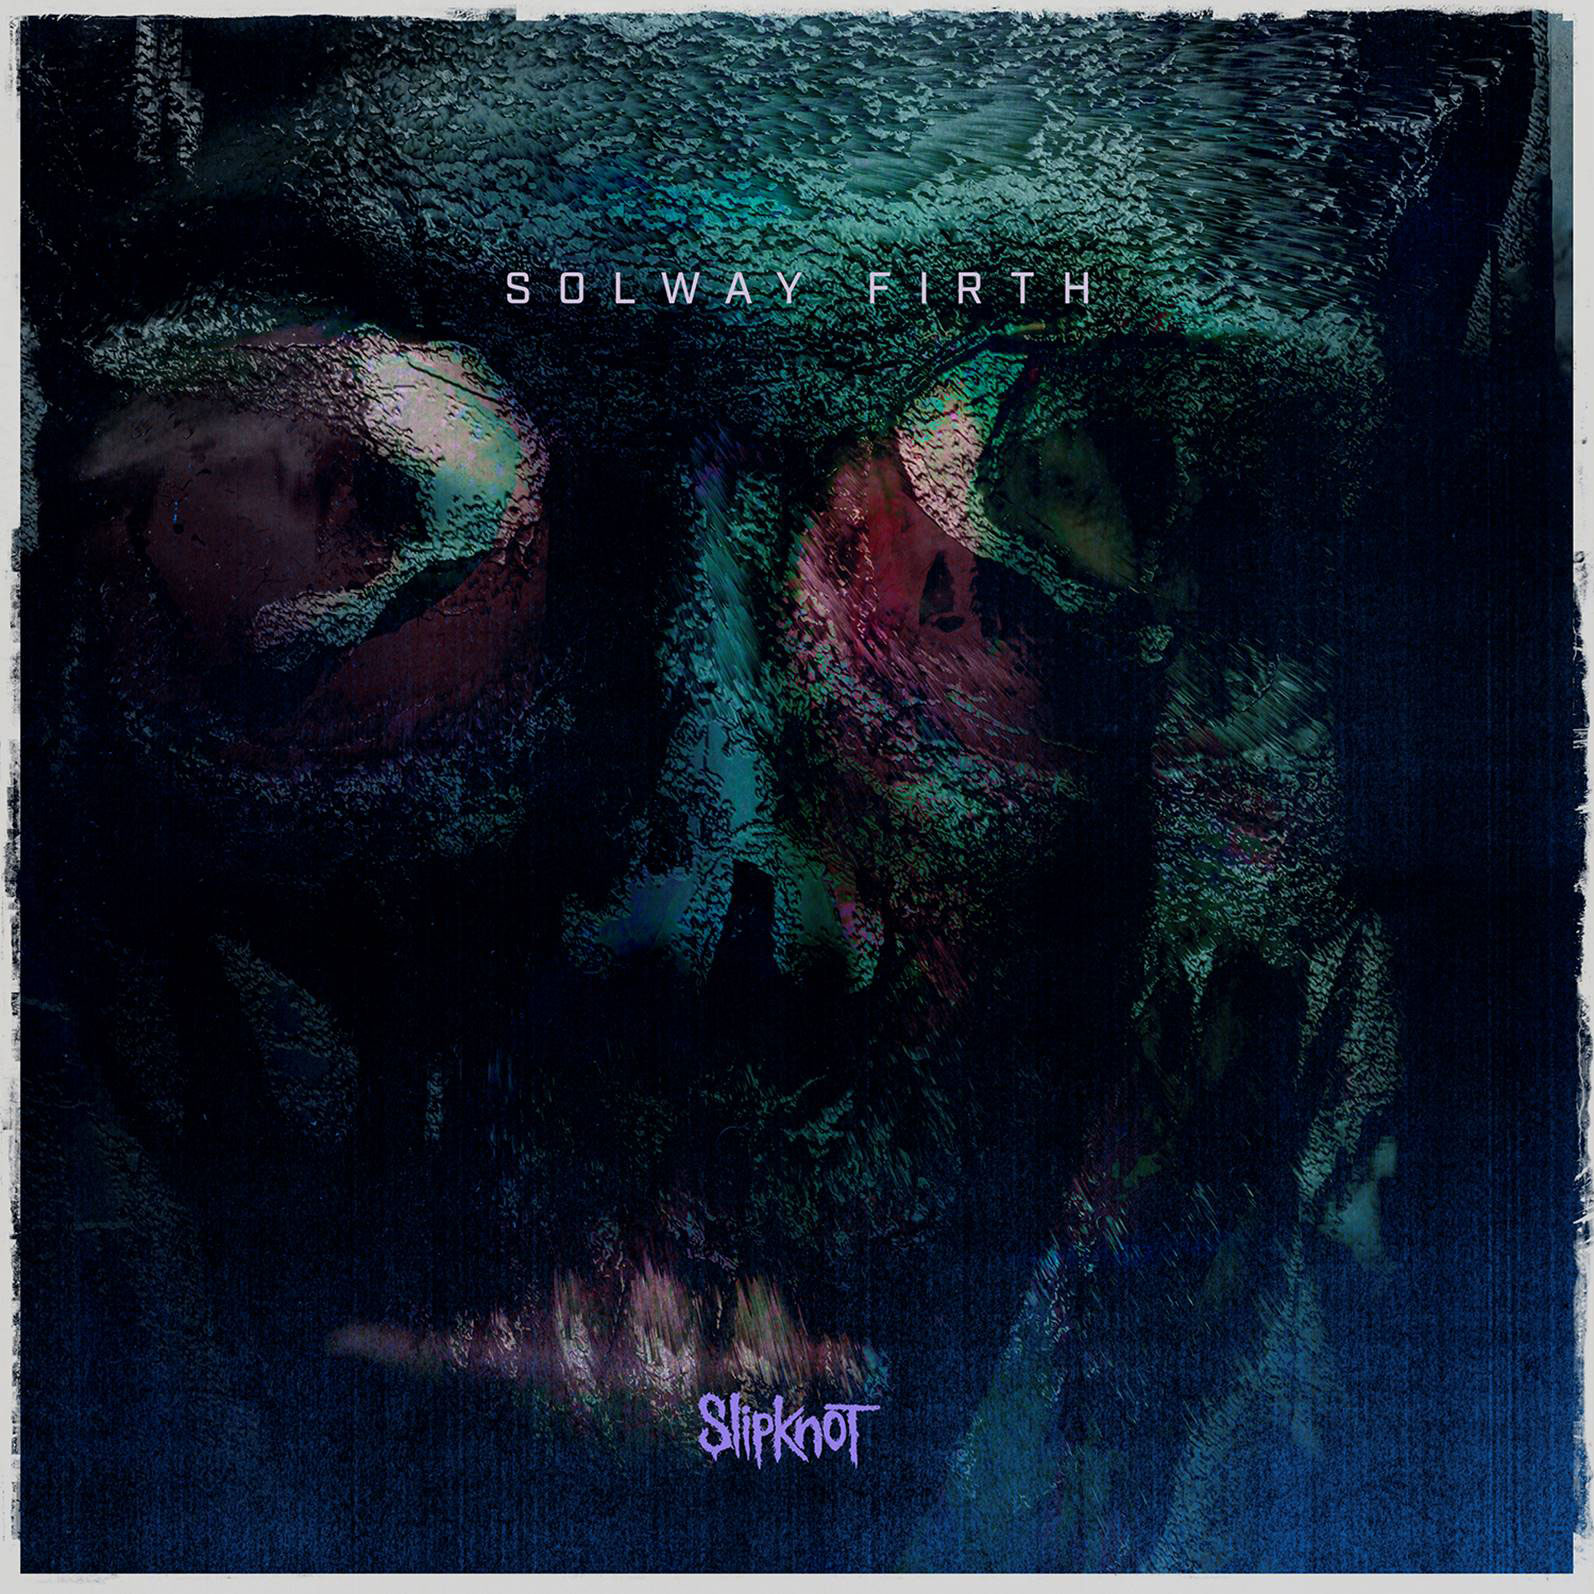 SLIPKNOT SHARE NEW SONG “SOLWAY FIRTH”